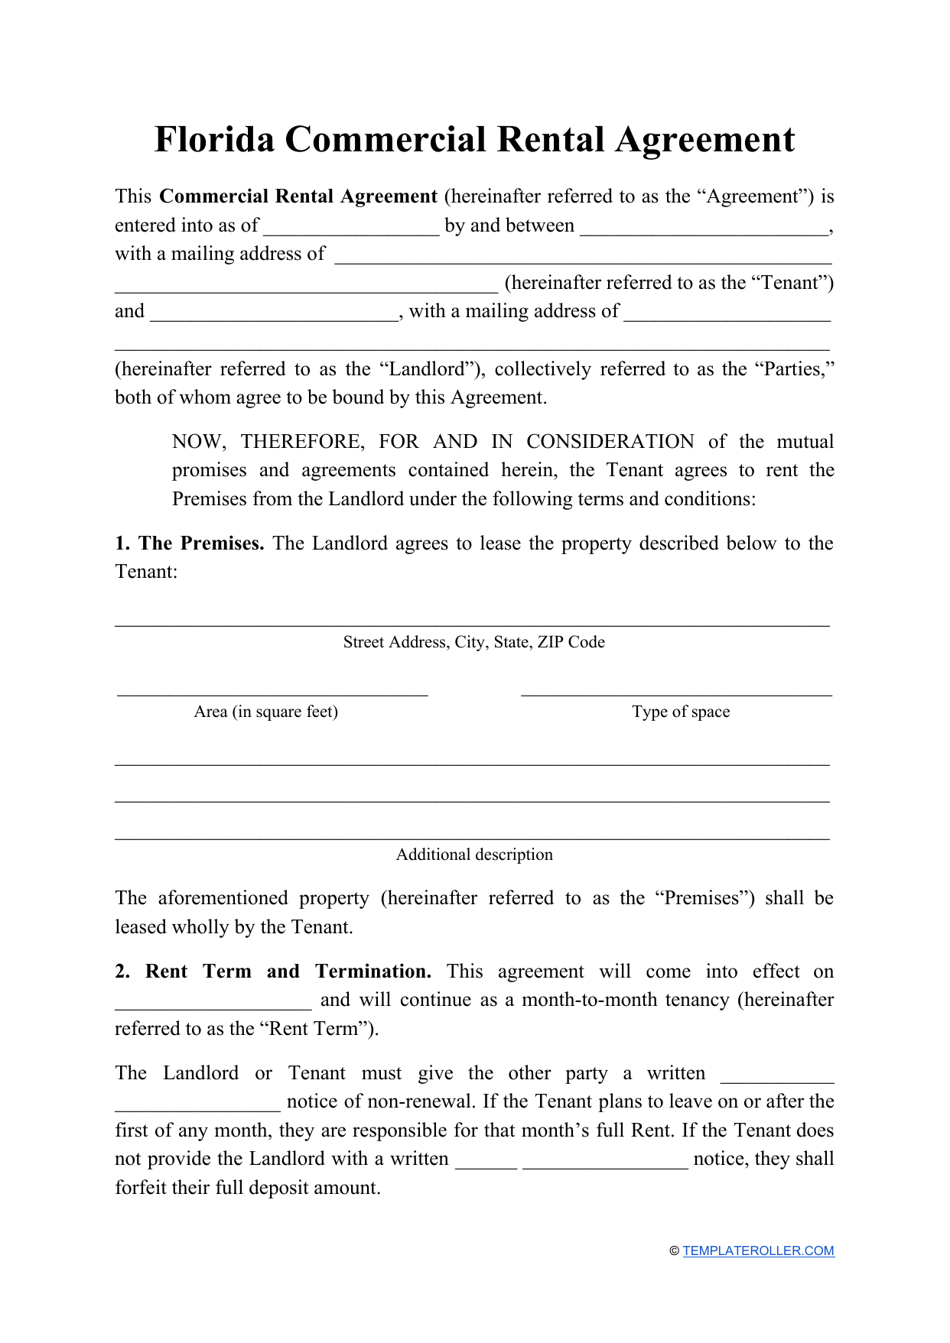 Commercial Rental Agreement Template - Florida, Page 1